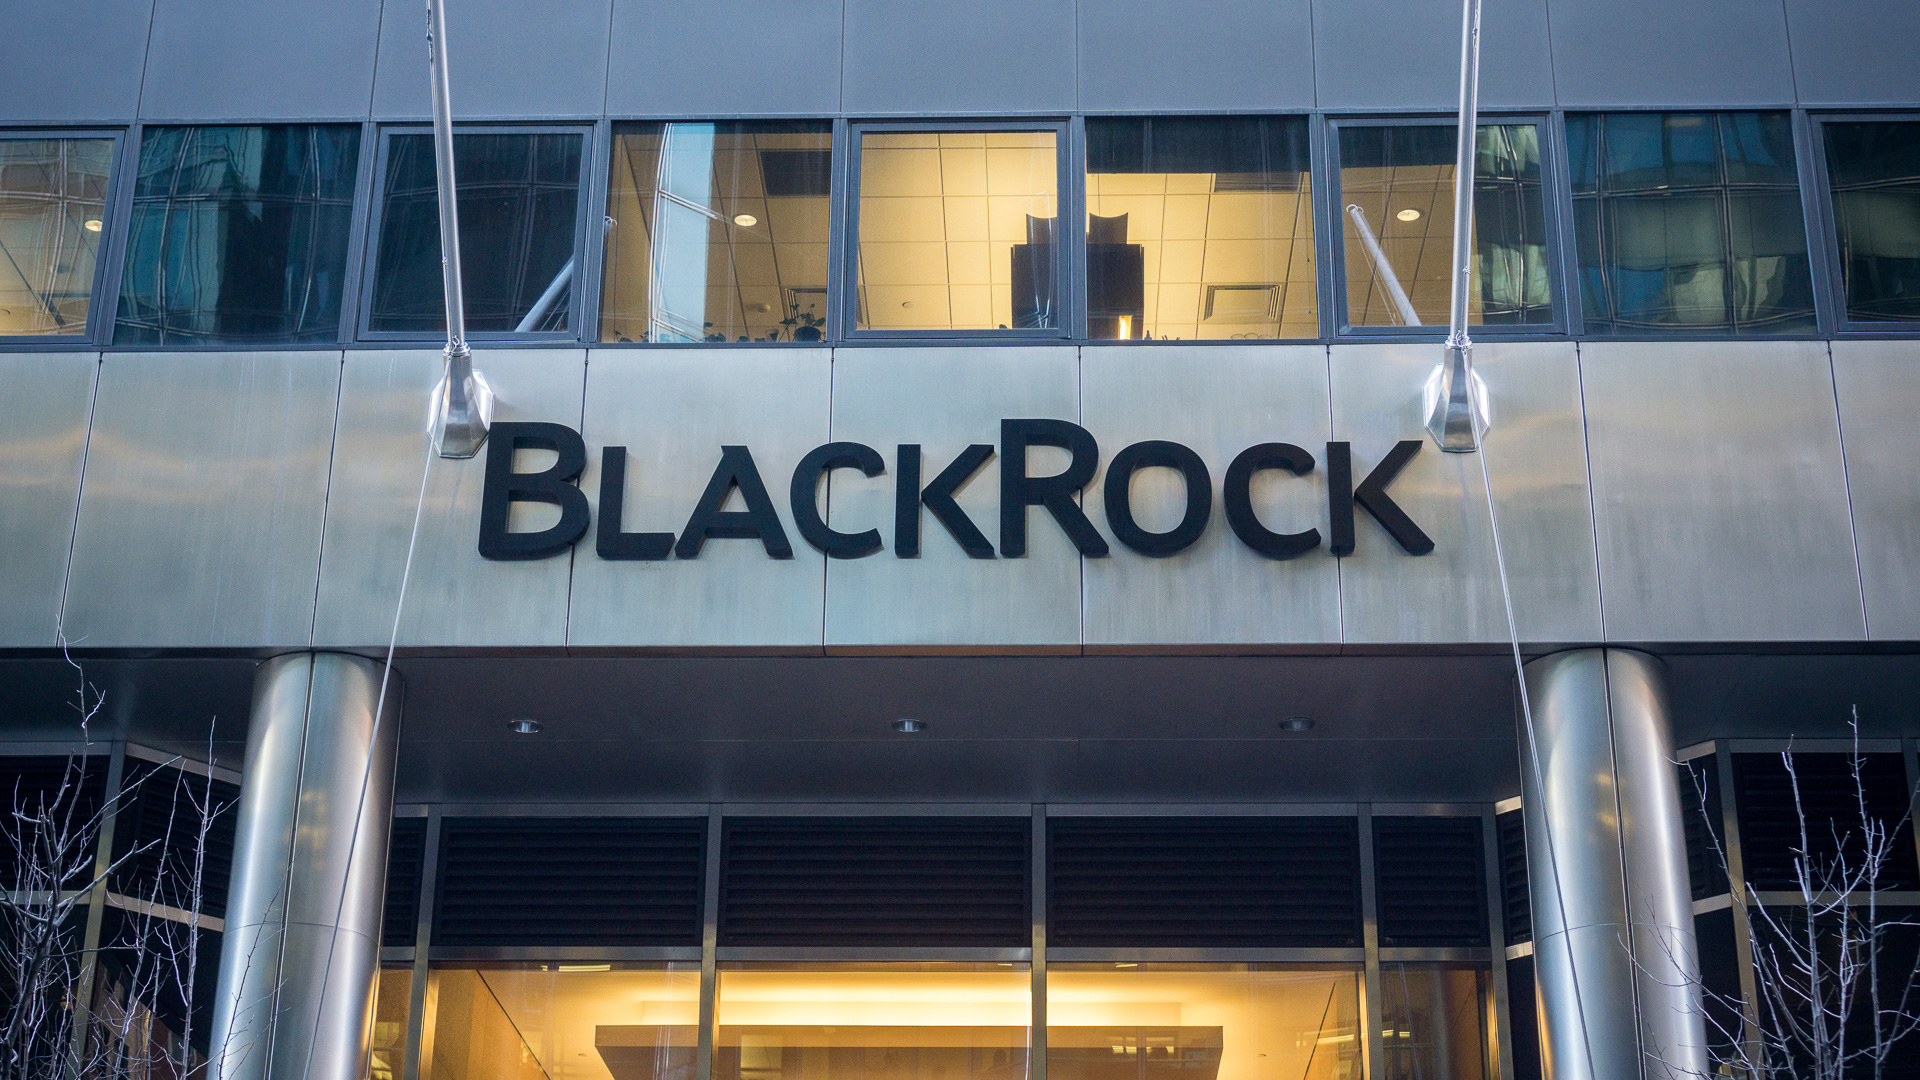 BlackRock Offers Crypto To Investors Via Latest Partnership With Coinbase